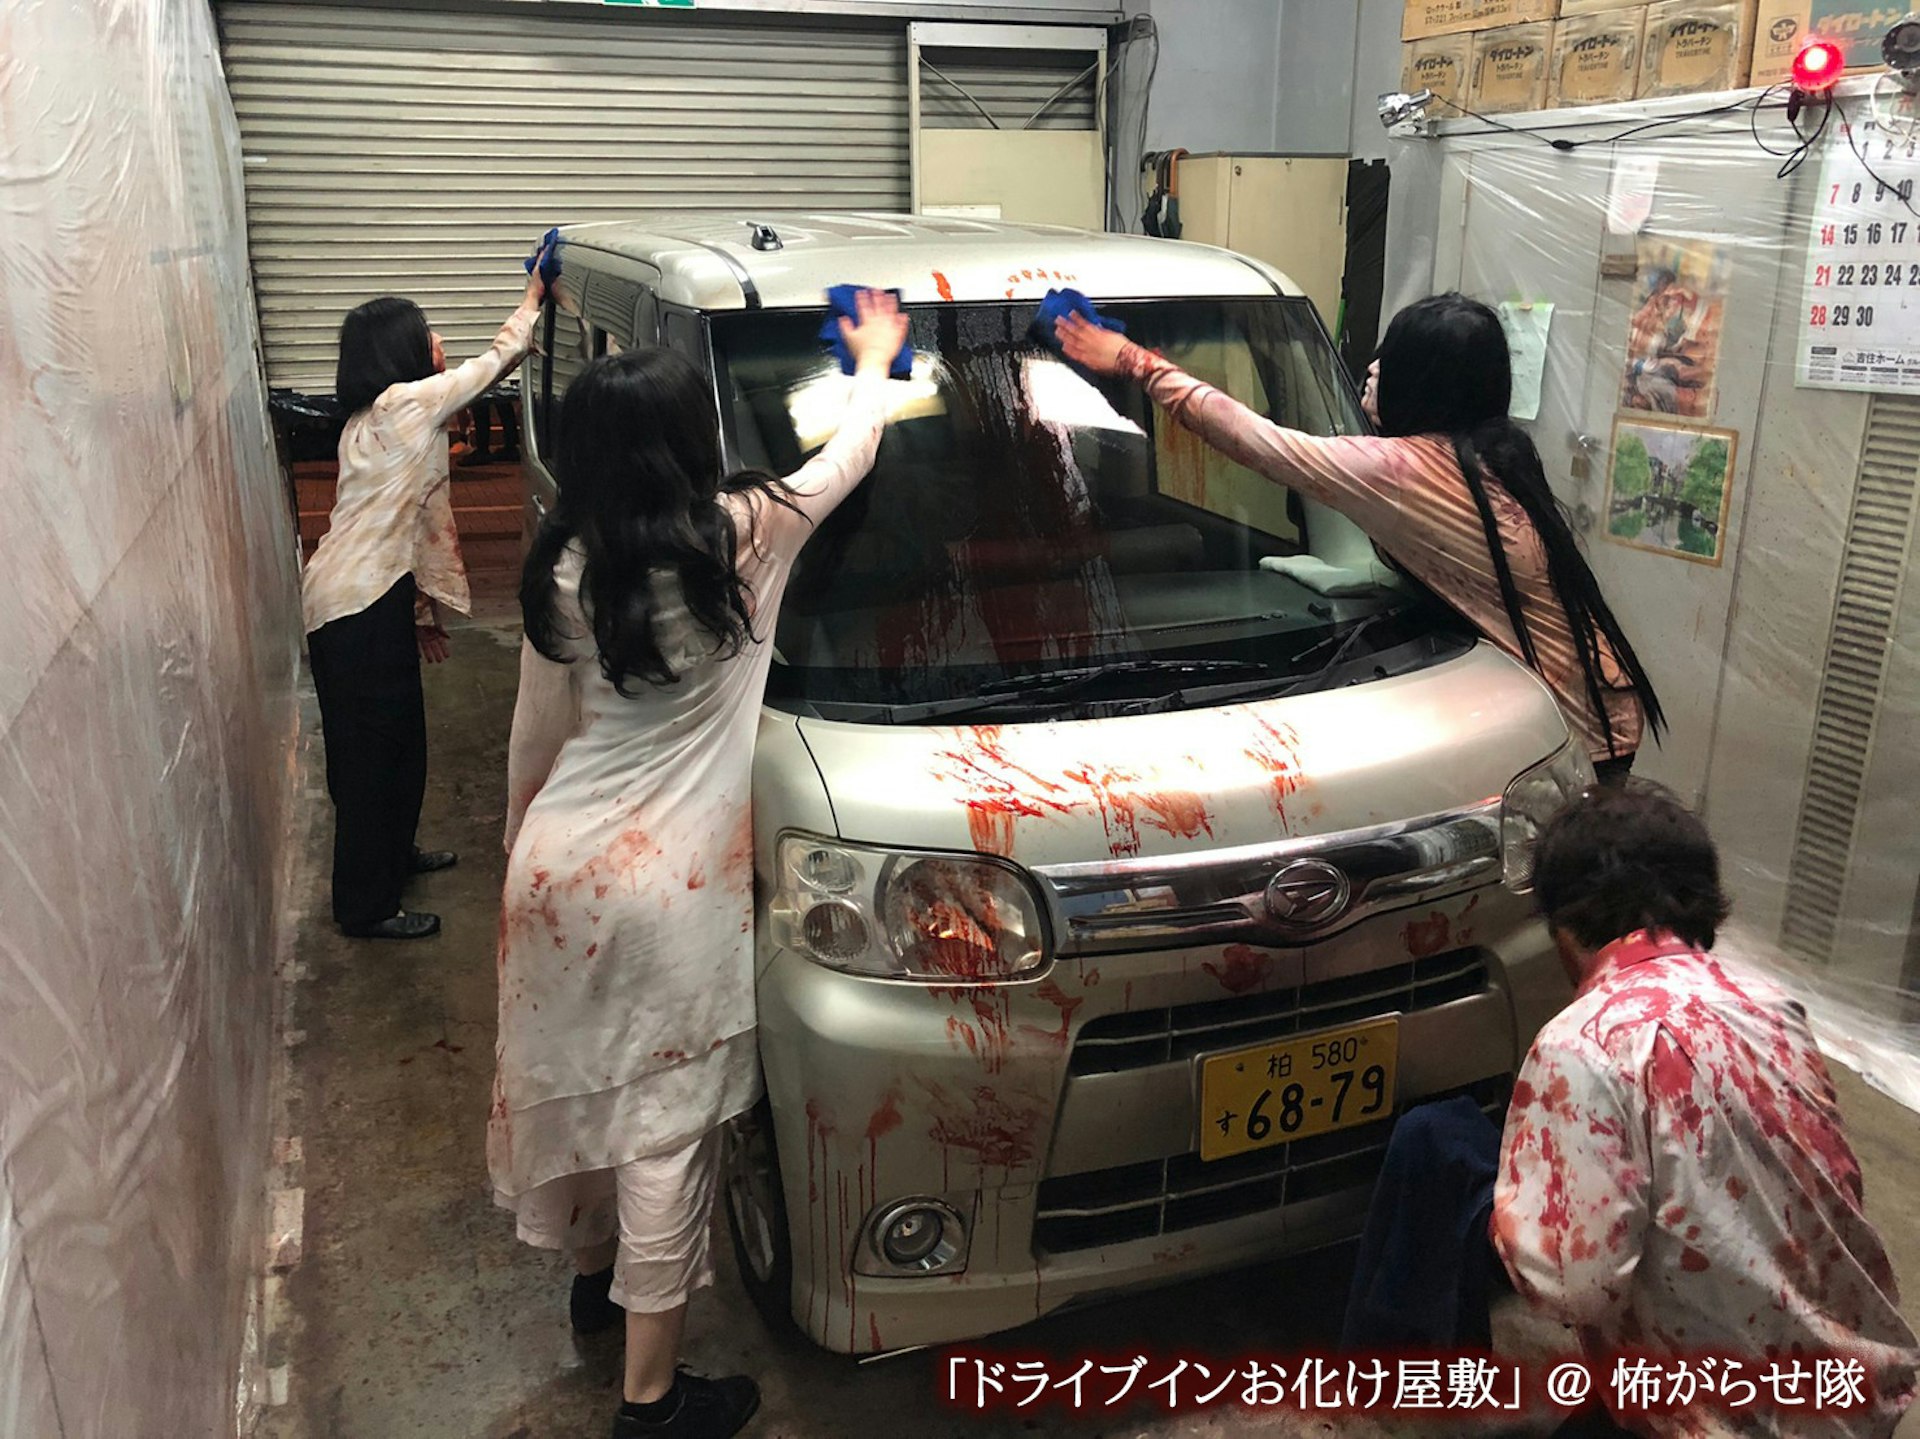 Vehicles are cleaned down by Kowagarasetai